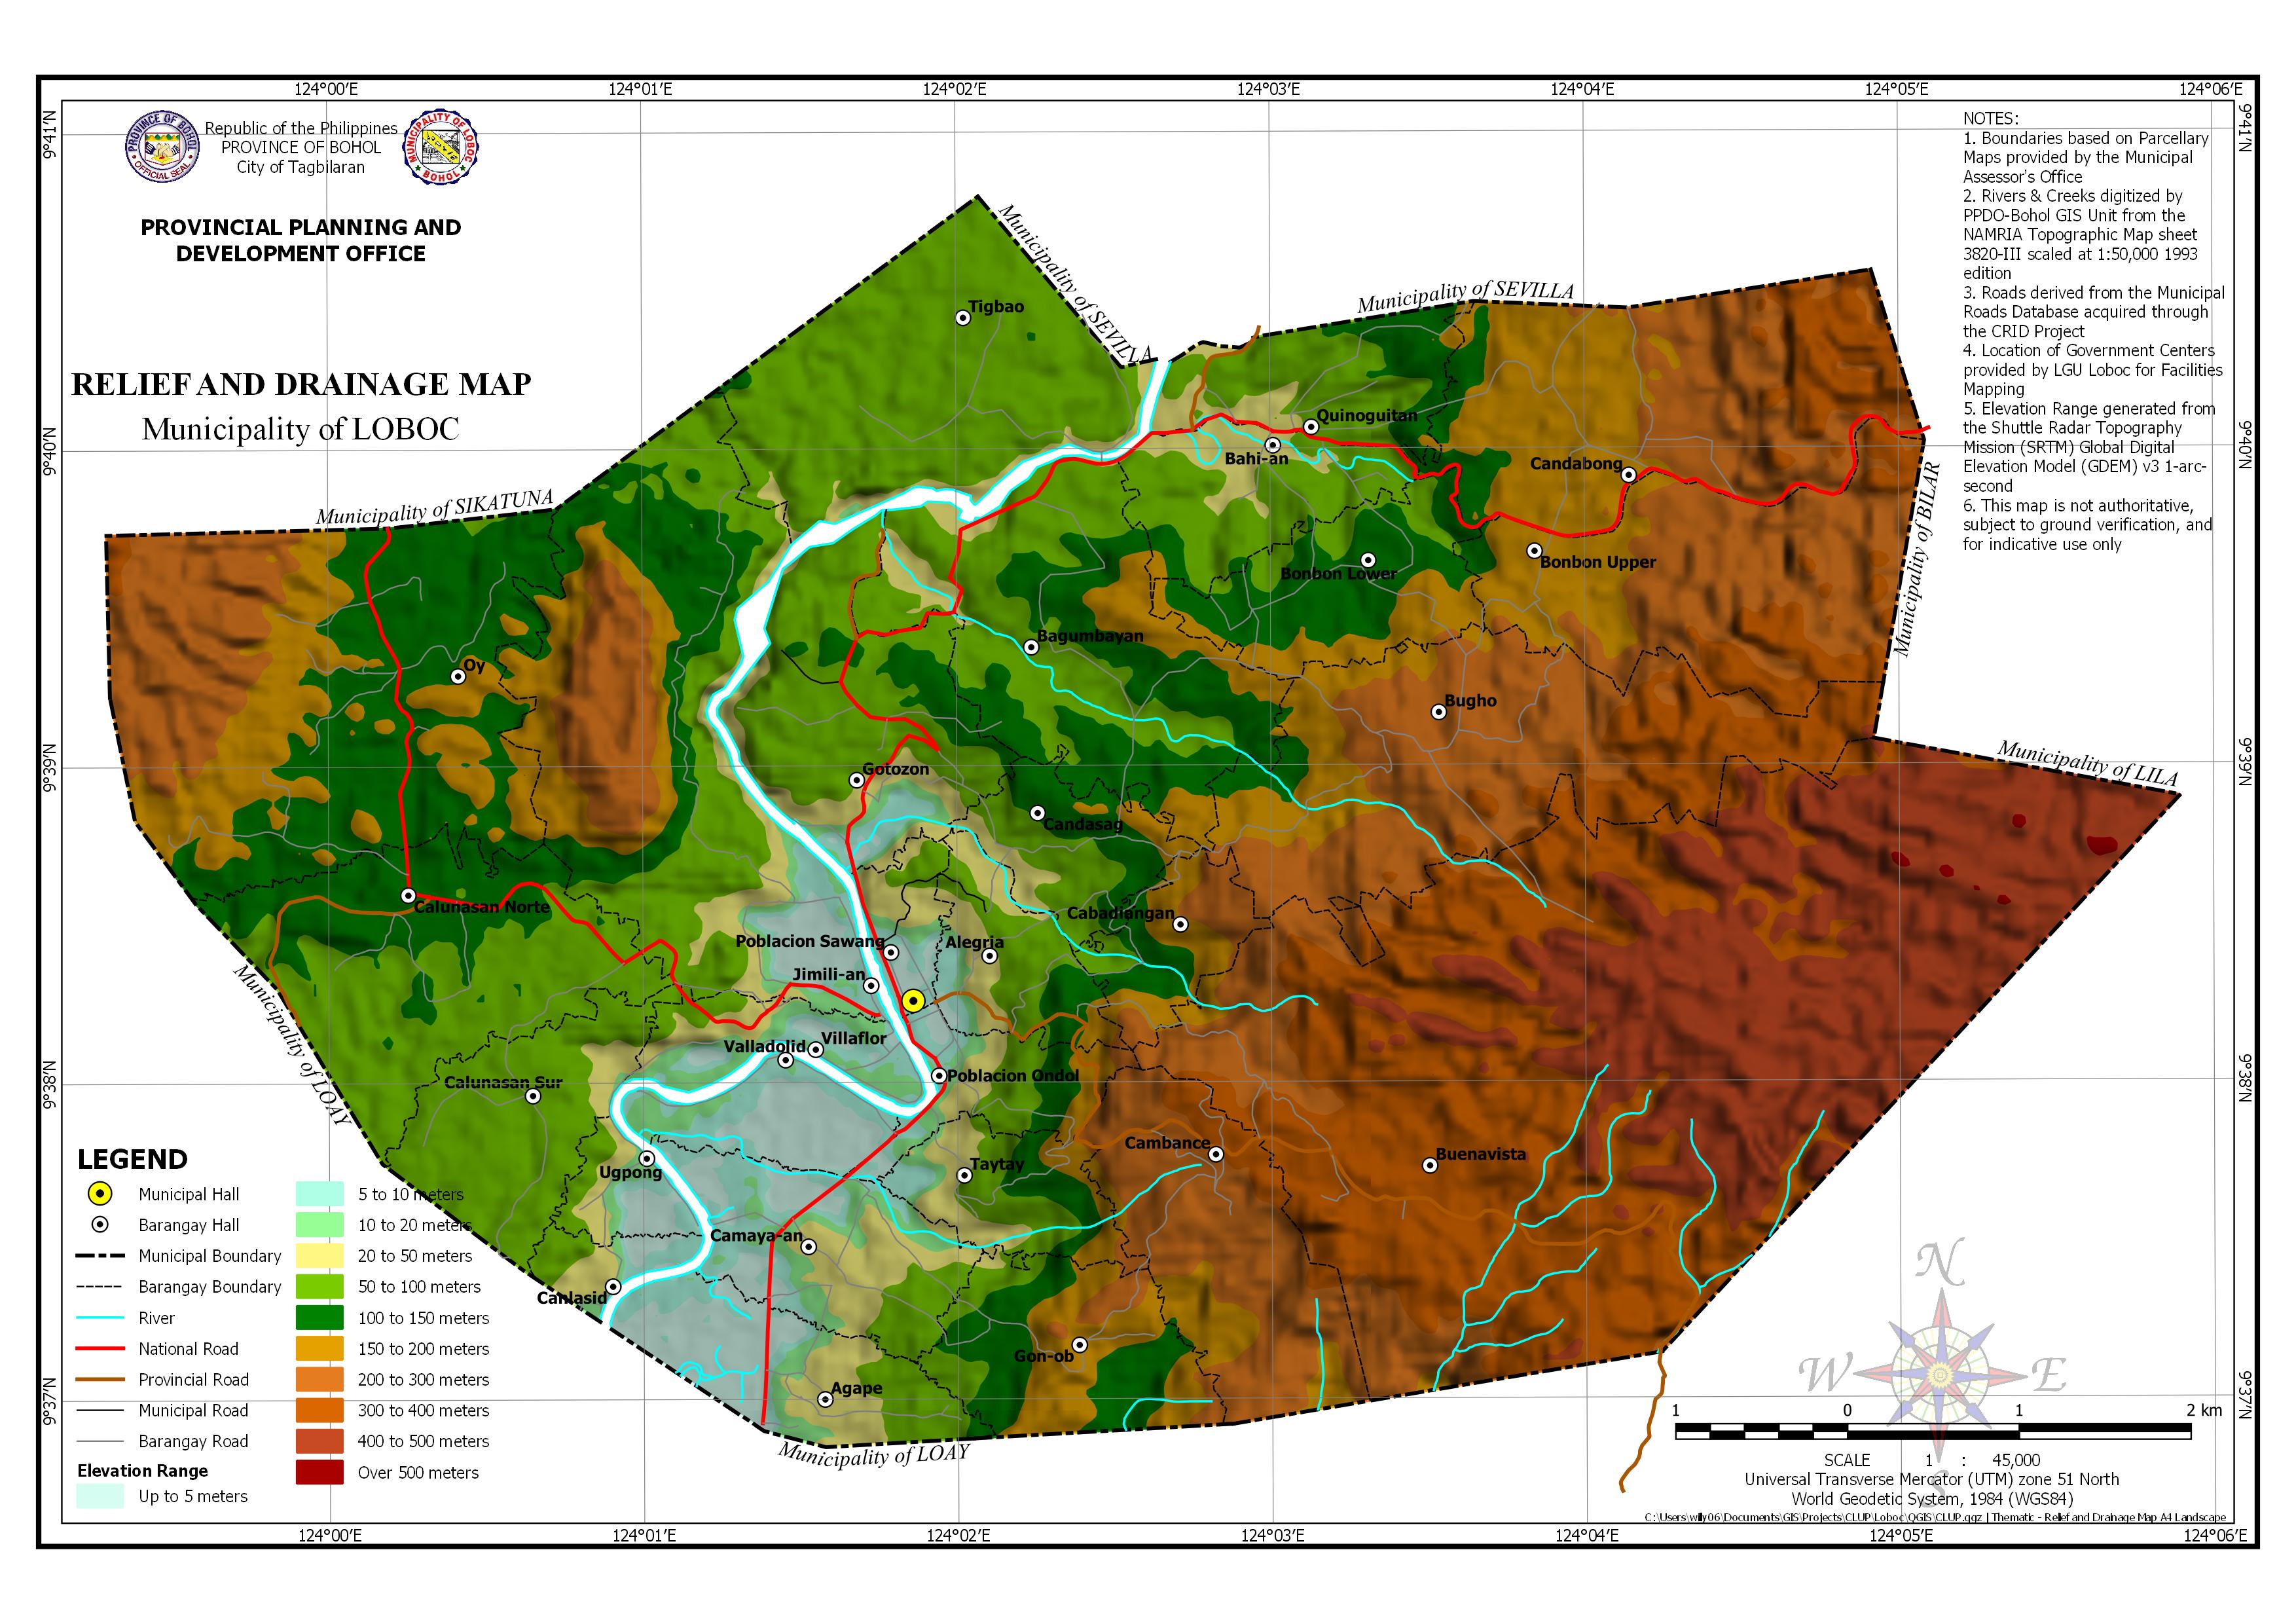 Relief and Drainage Map